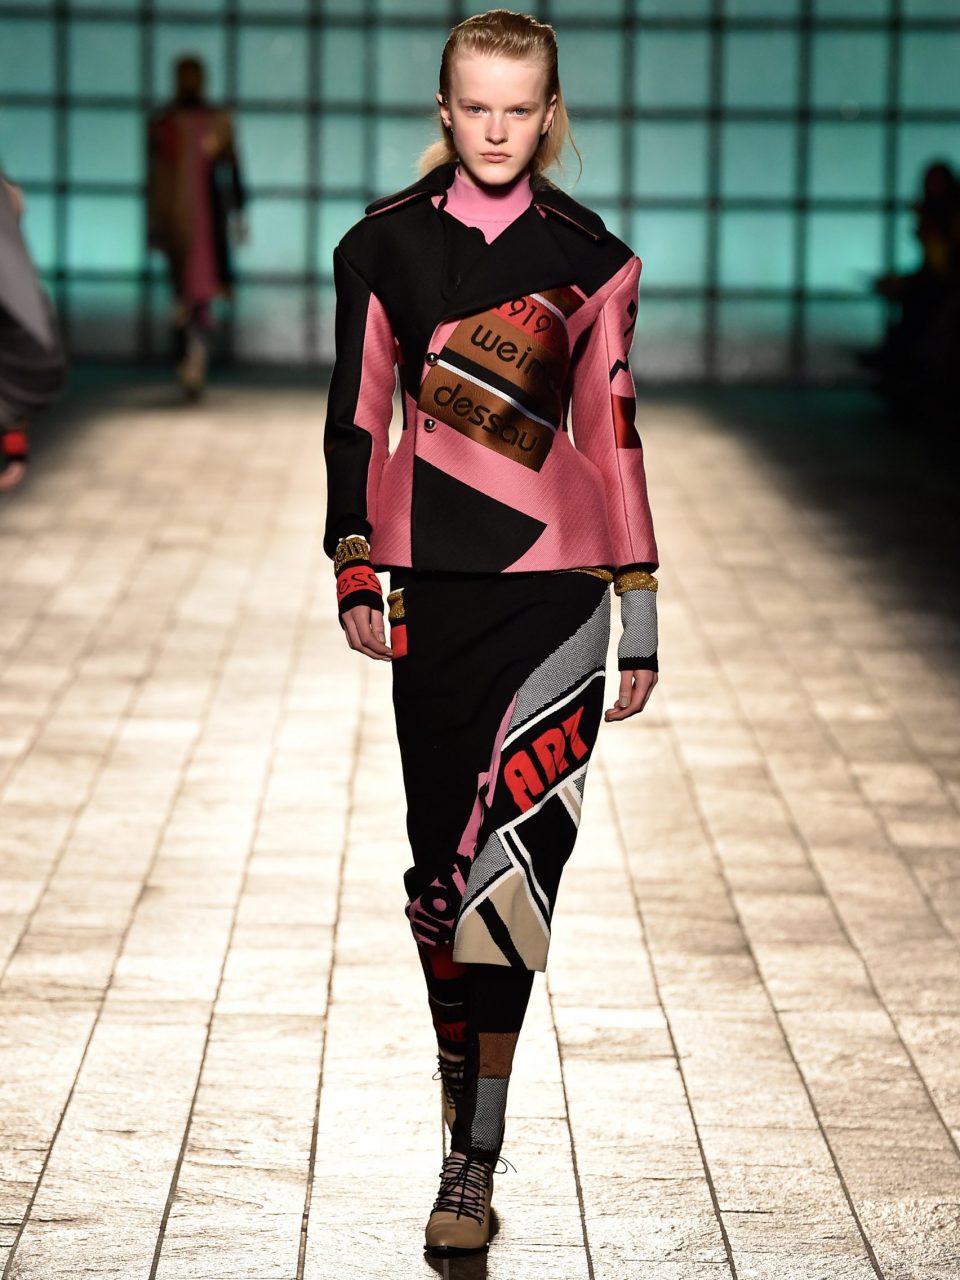 Architectural Fashion: Hybrid Outfits Combine Bauhaus with Arts ...